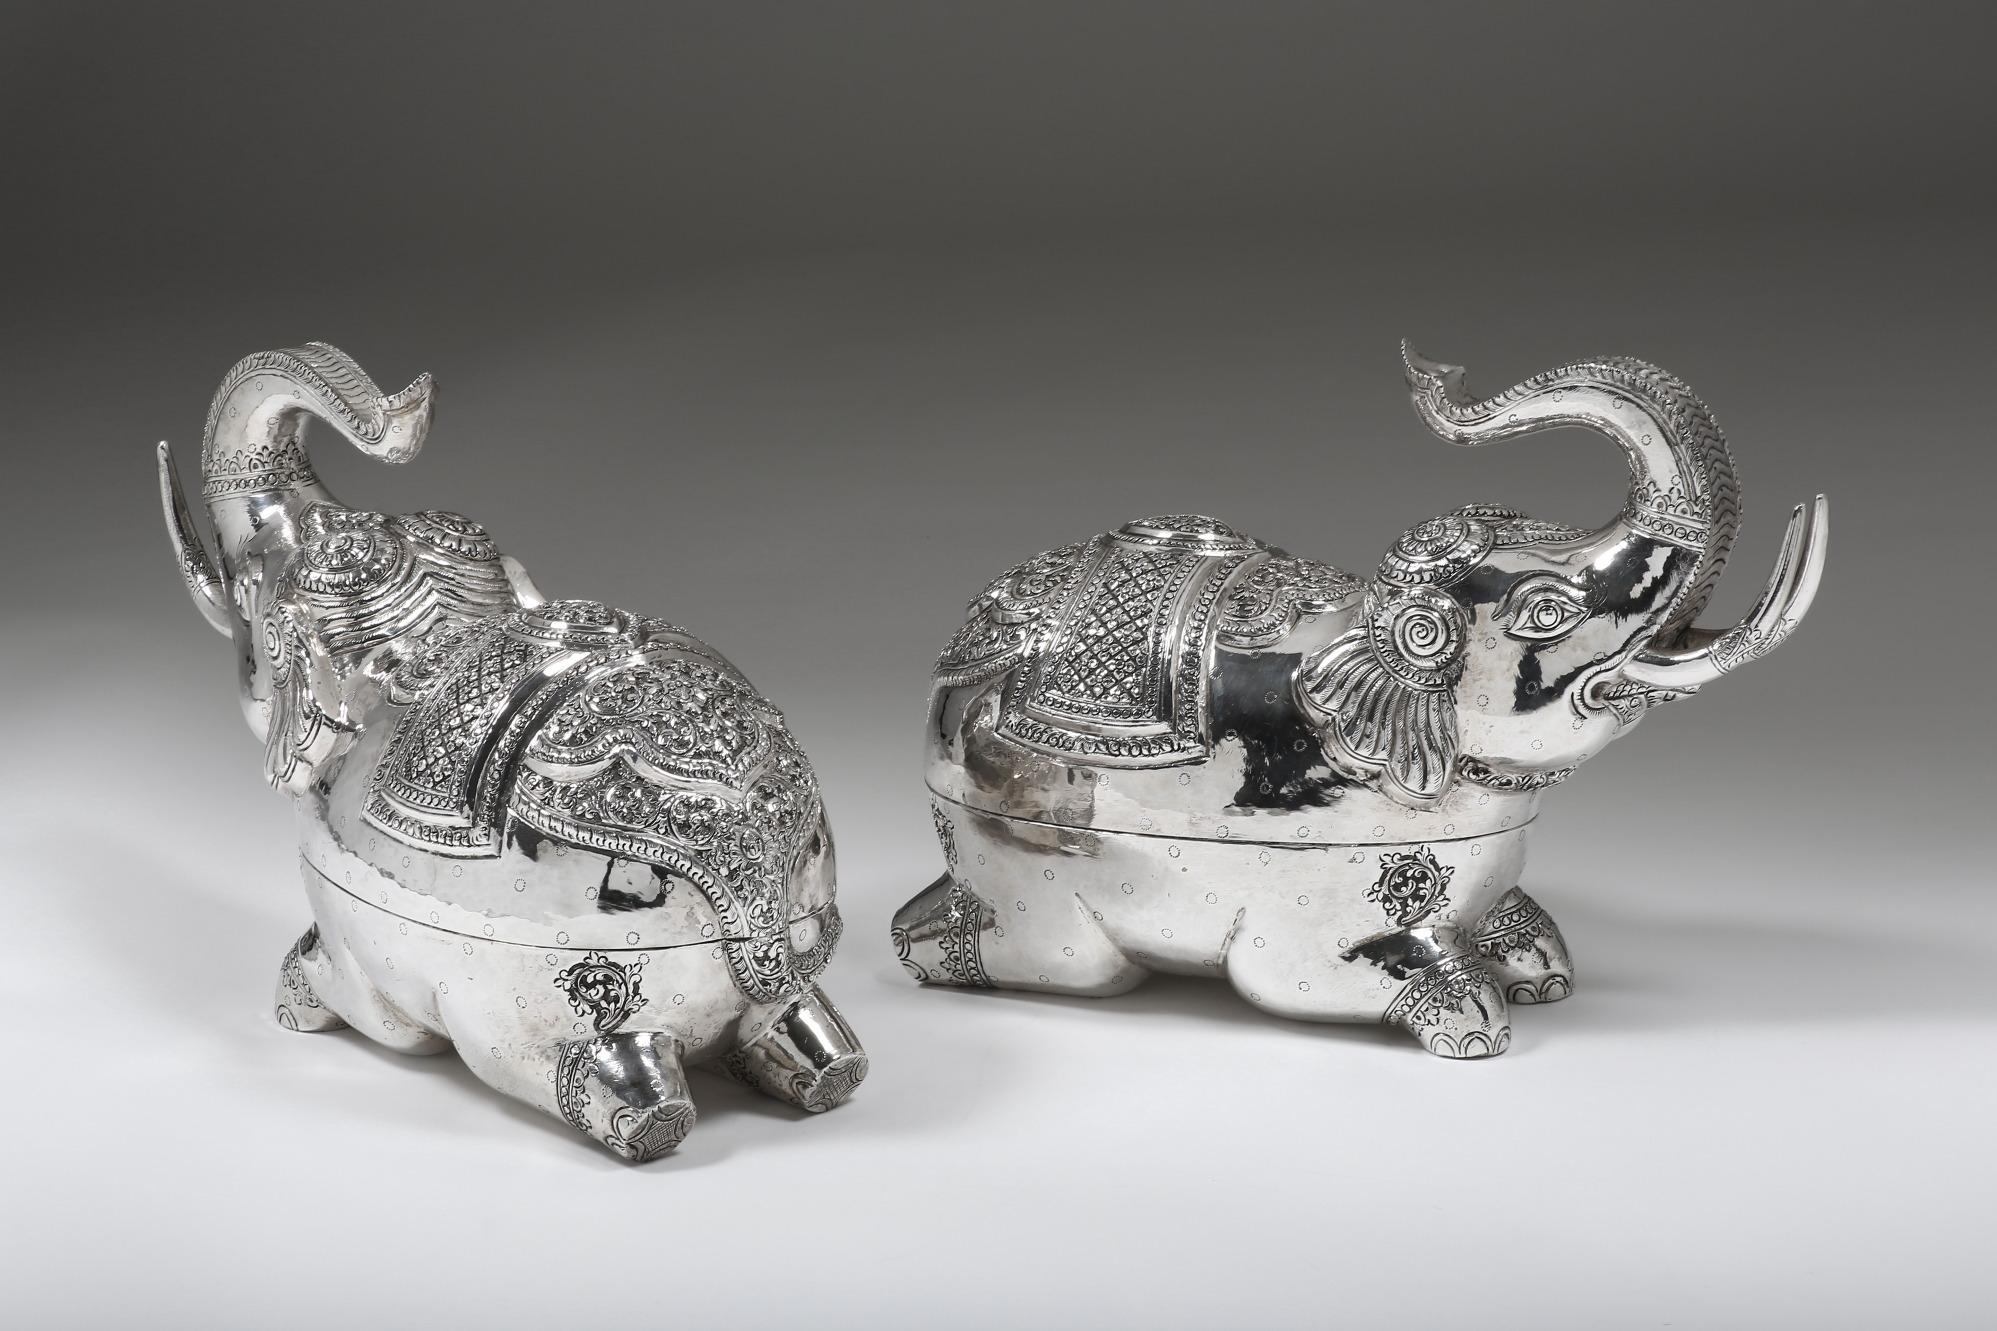 Hand-Crafted Hand-Worked Contemporary Solid Silver Elephant Box For Sale